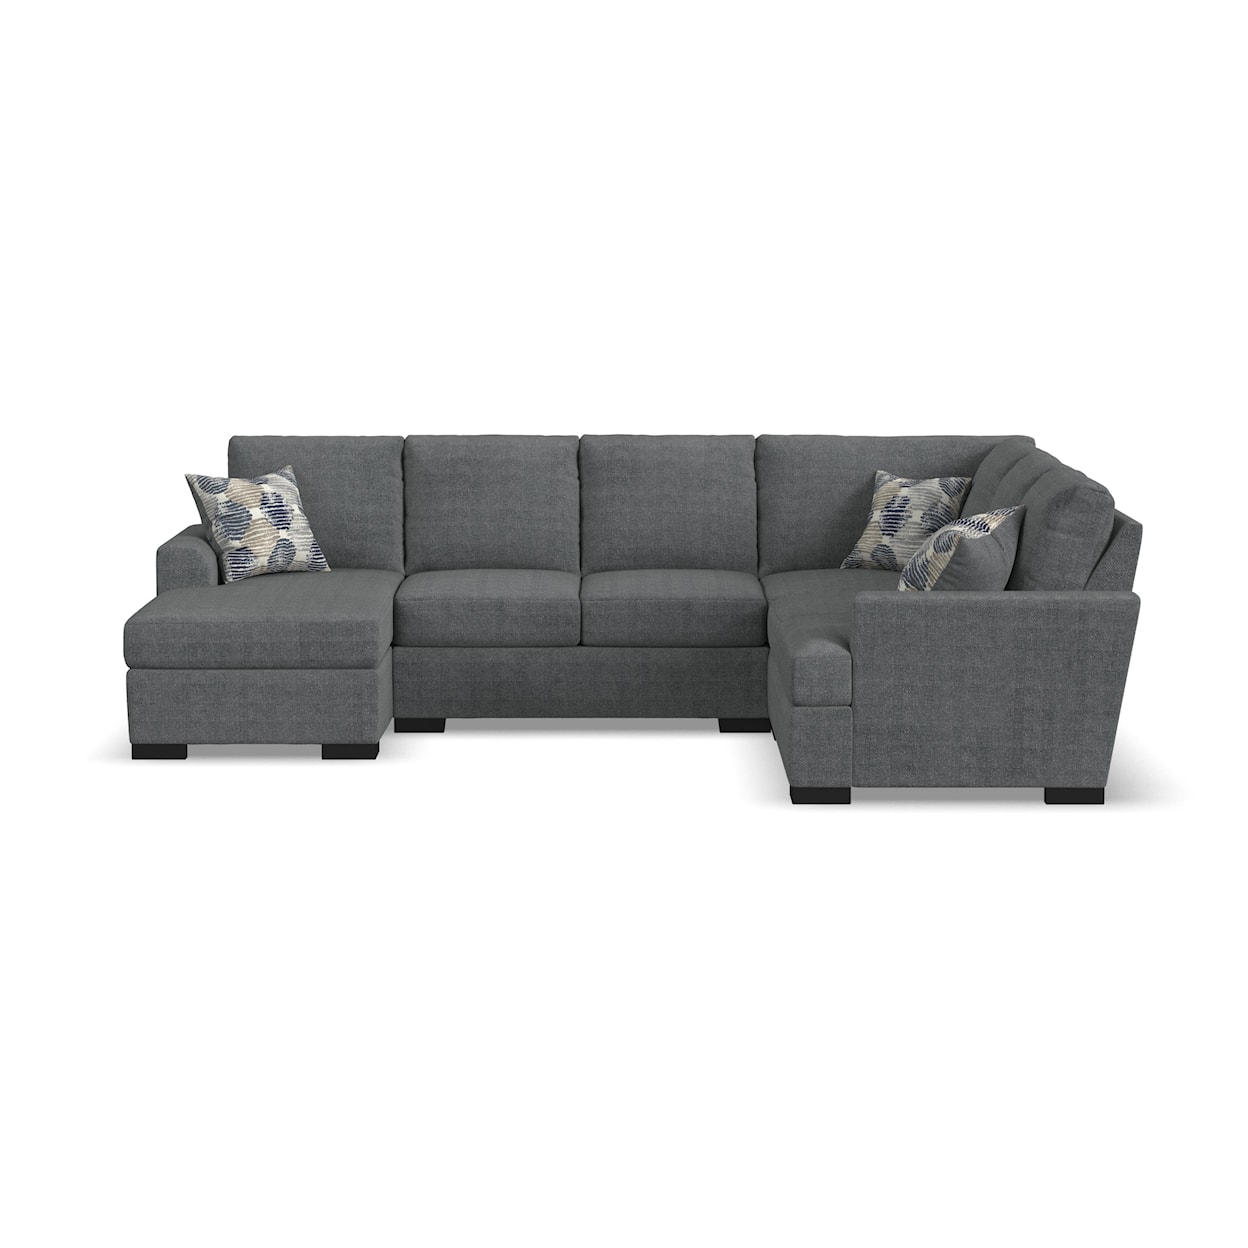 Flexsteel Charisma - Willow LAF Chaise Sectional